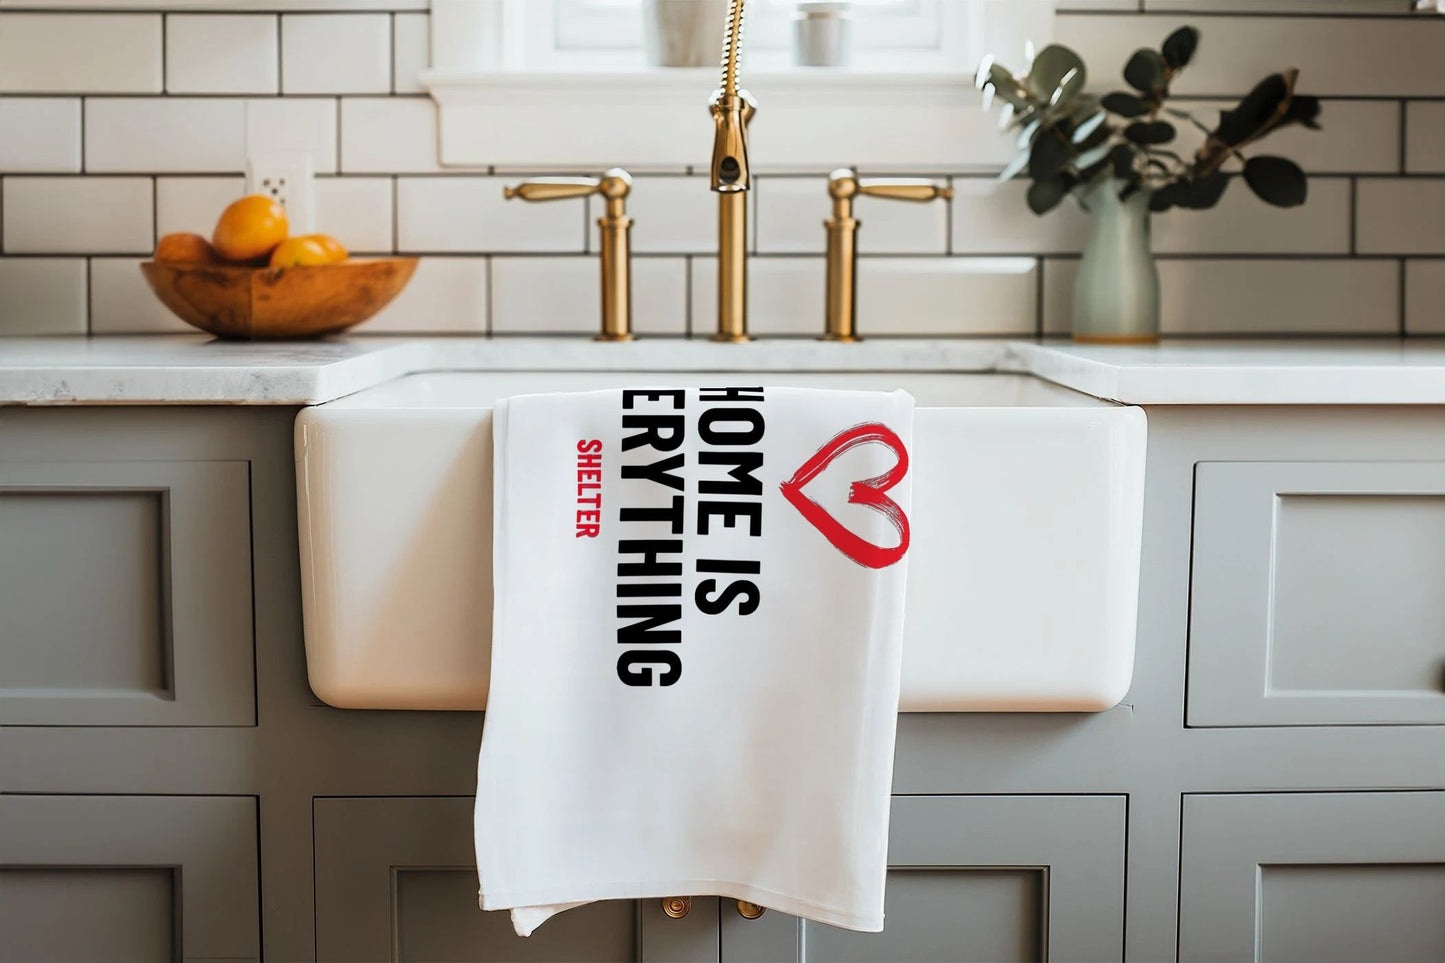 'Home is everything' teatowel folded up and hanging over a sink.